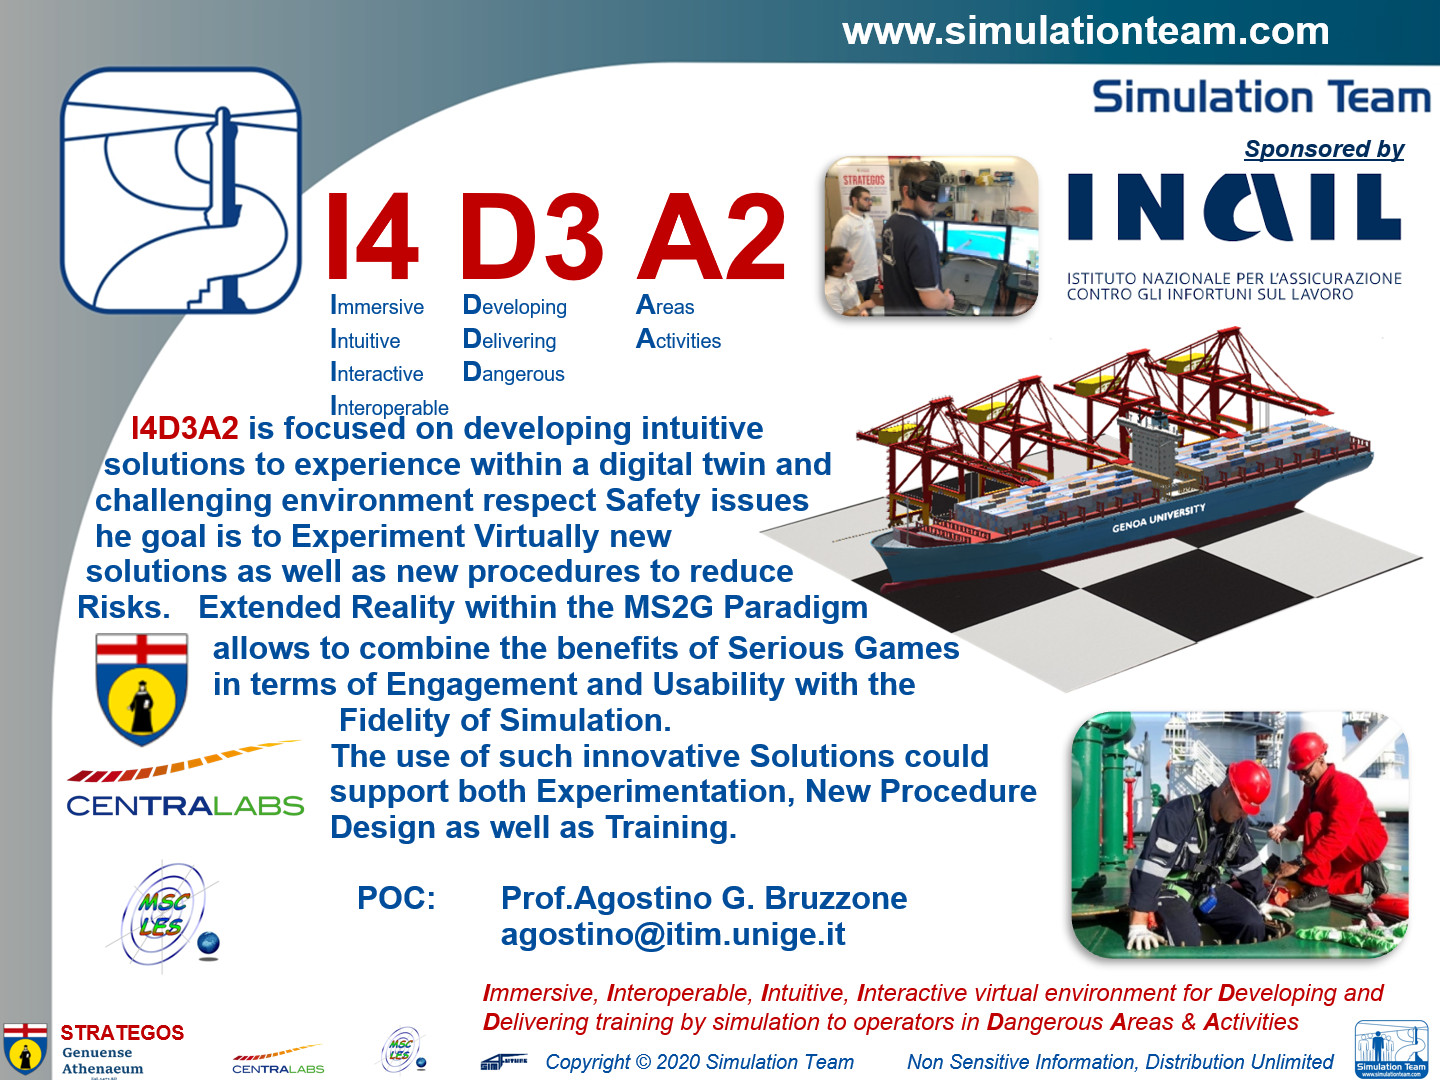 I4 D3 A2 - Immersive, Interoperable, Intuitive, Interactive virtual environment for Developing and Delivering training by simulation to operators in Dangerous Areas & Activities